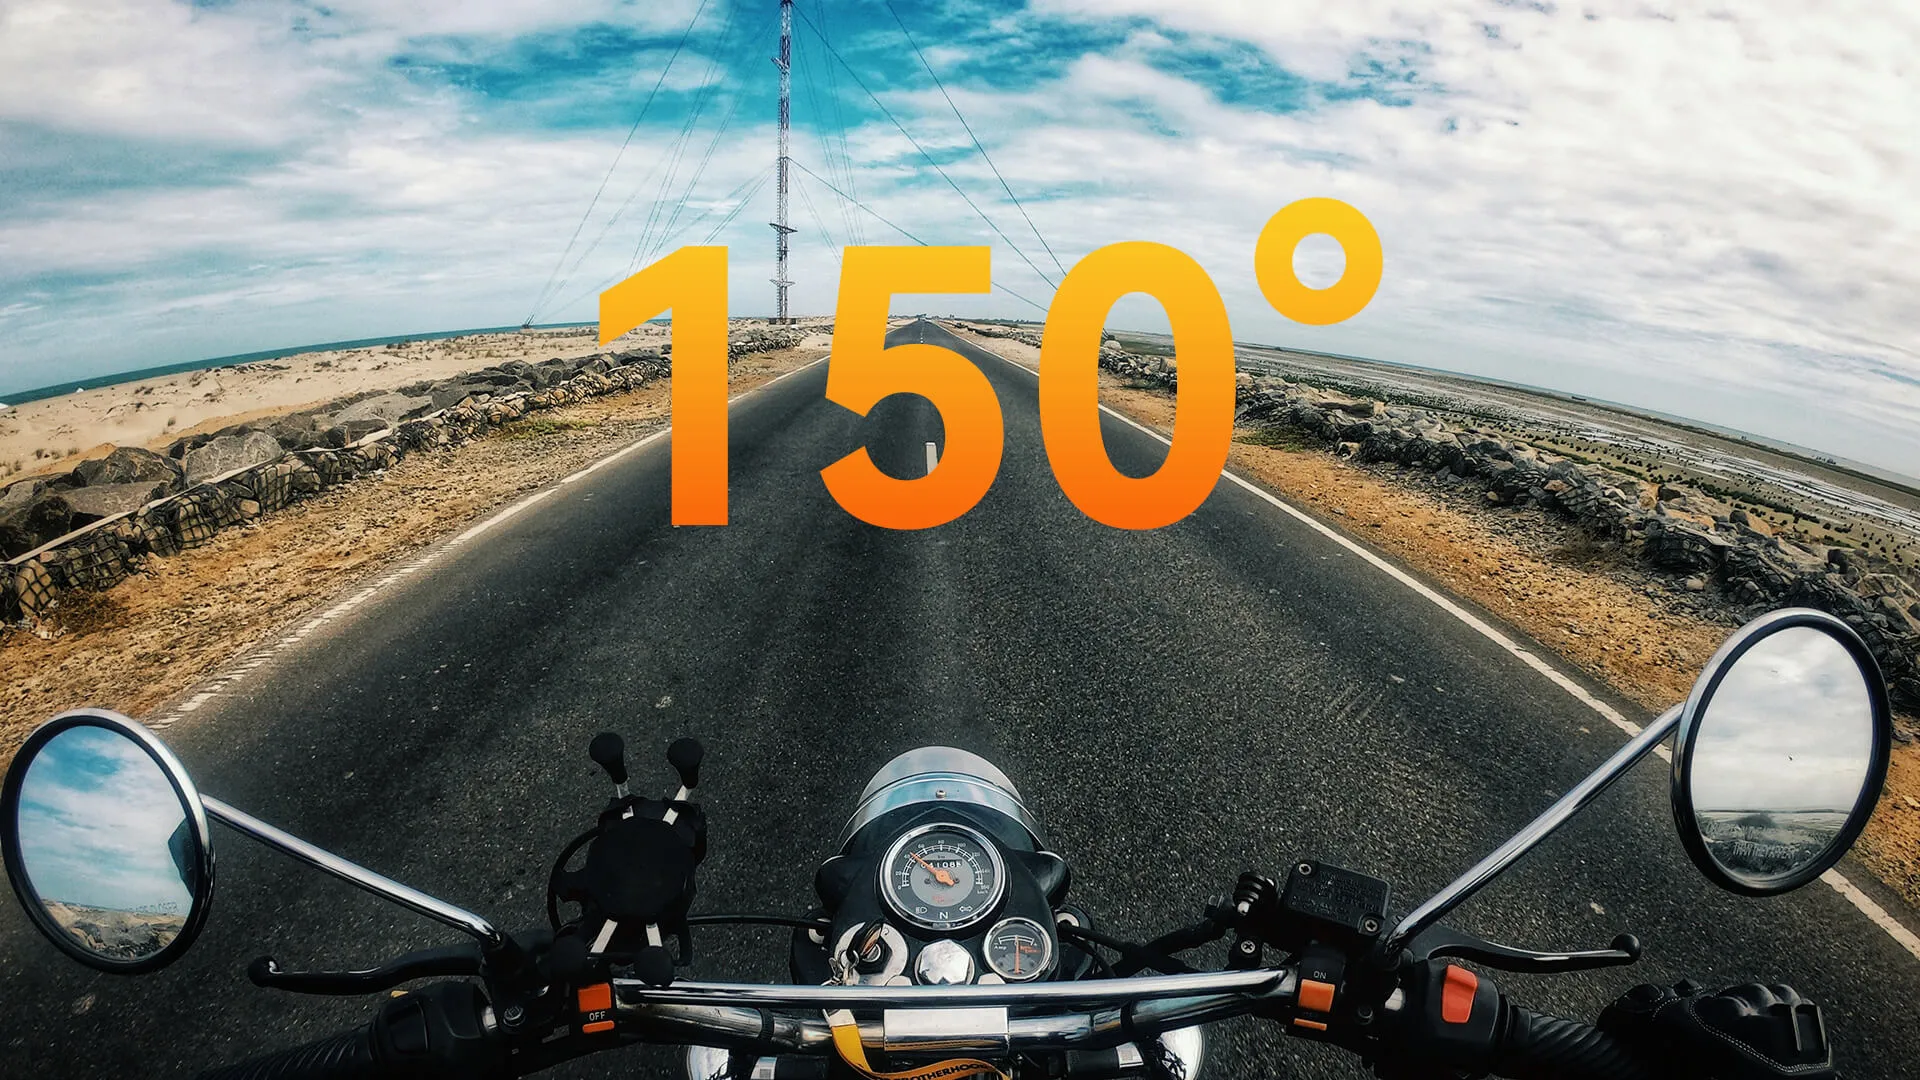 First-person view of a motorcycle ride along a coastal road, showcasing the Ranger Riding Camera 150° wide-angle lens.